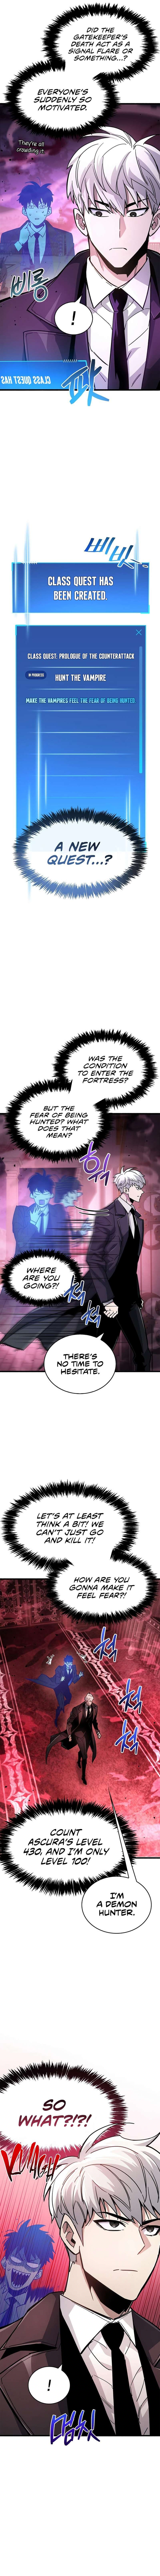 The Player Hides His Past Chapter 13 page 7